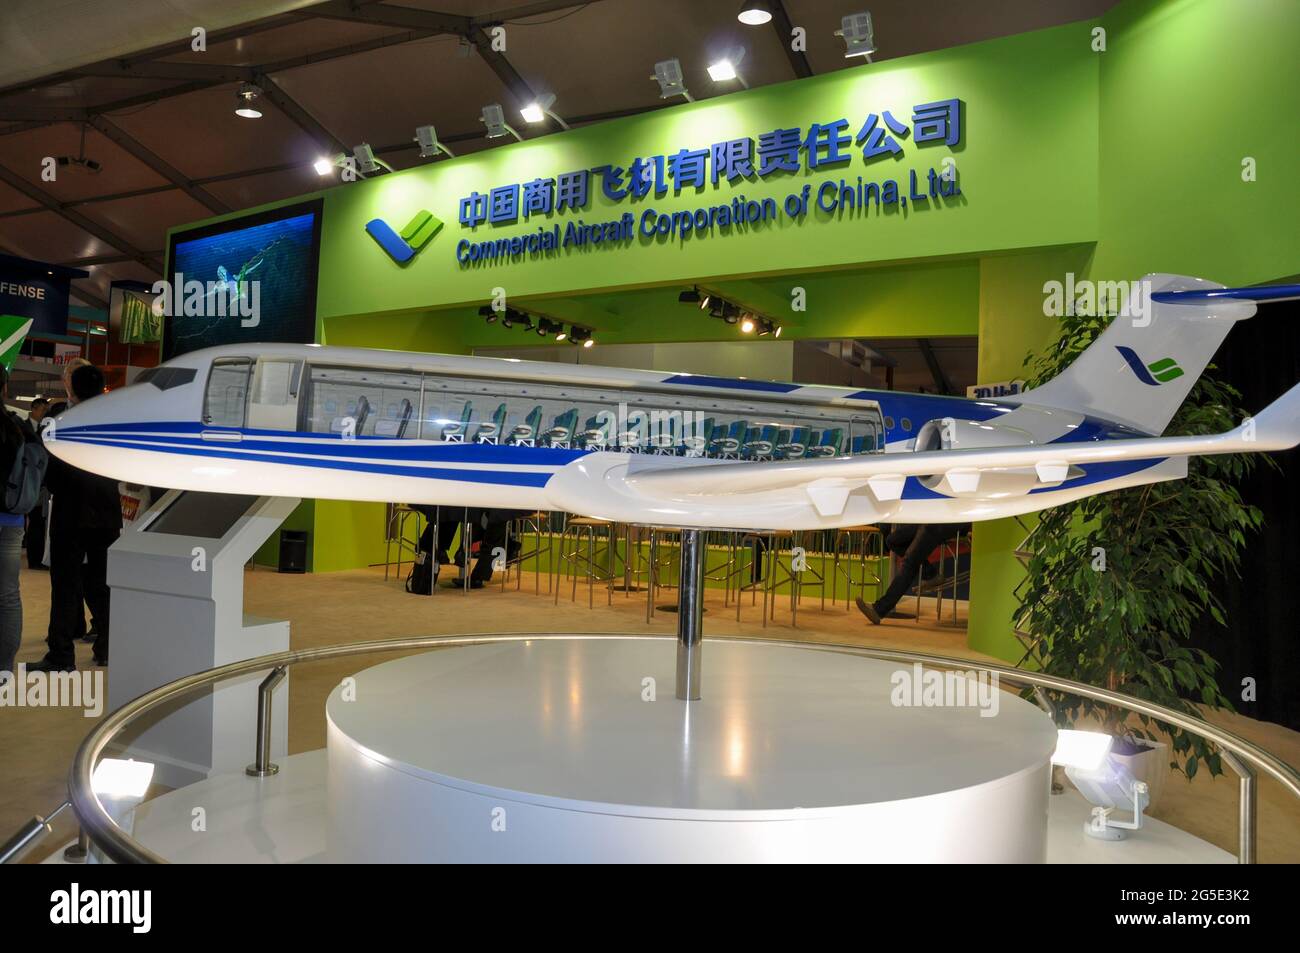 Commercial Aircraft Corporation of China Ltd, Comac stand at the Farnborough International Airshow trade show. Jet plane display model. Business Stock Photo